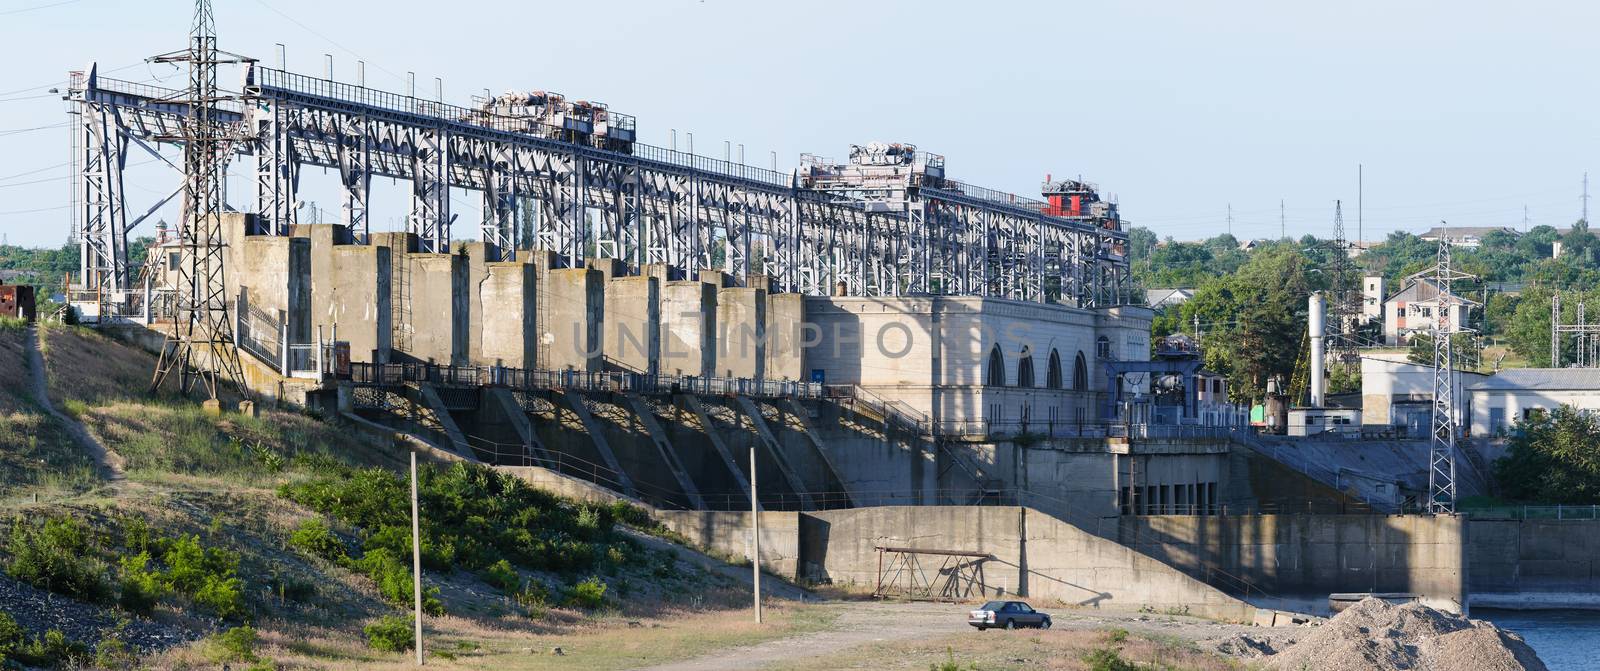 Hydroelectric power plant at river Dniester, Moldova. by starush